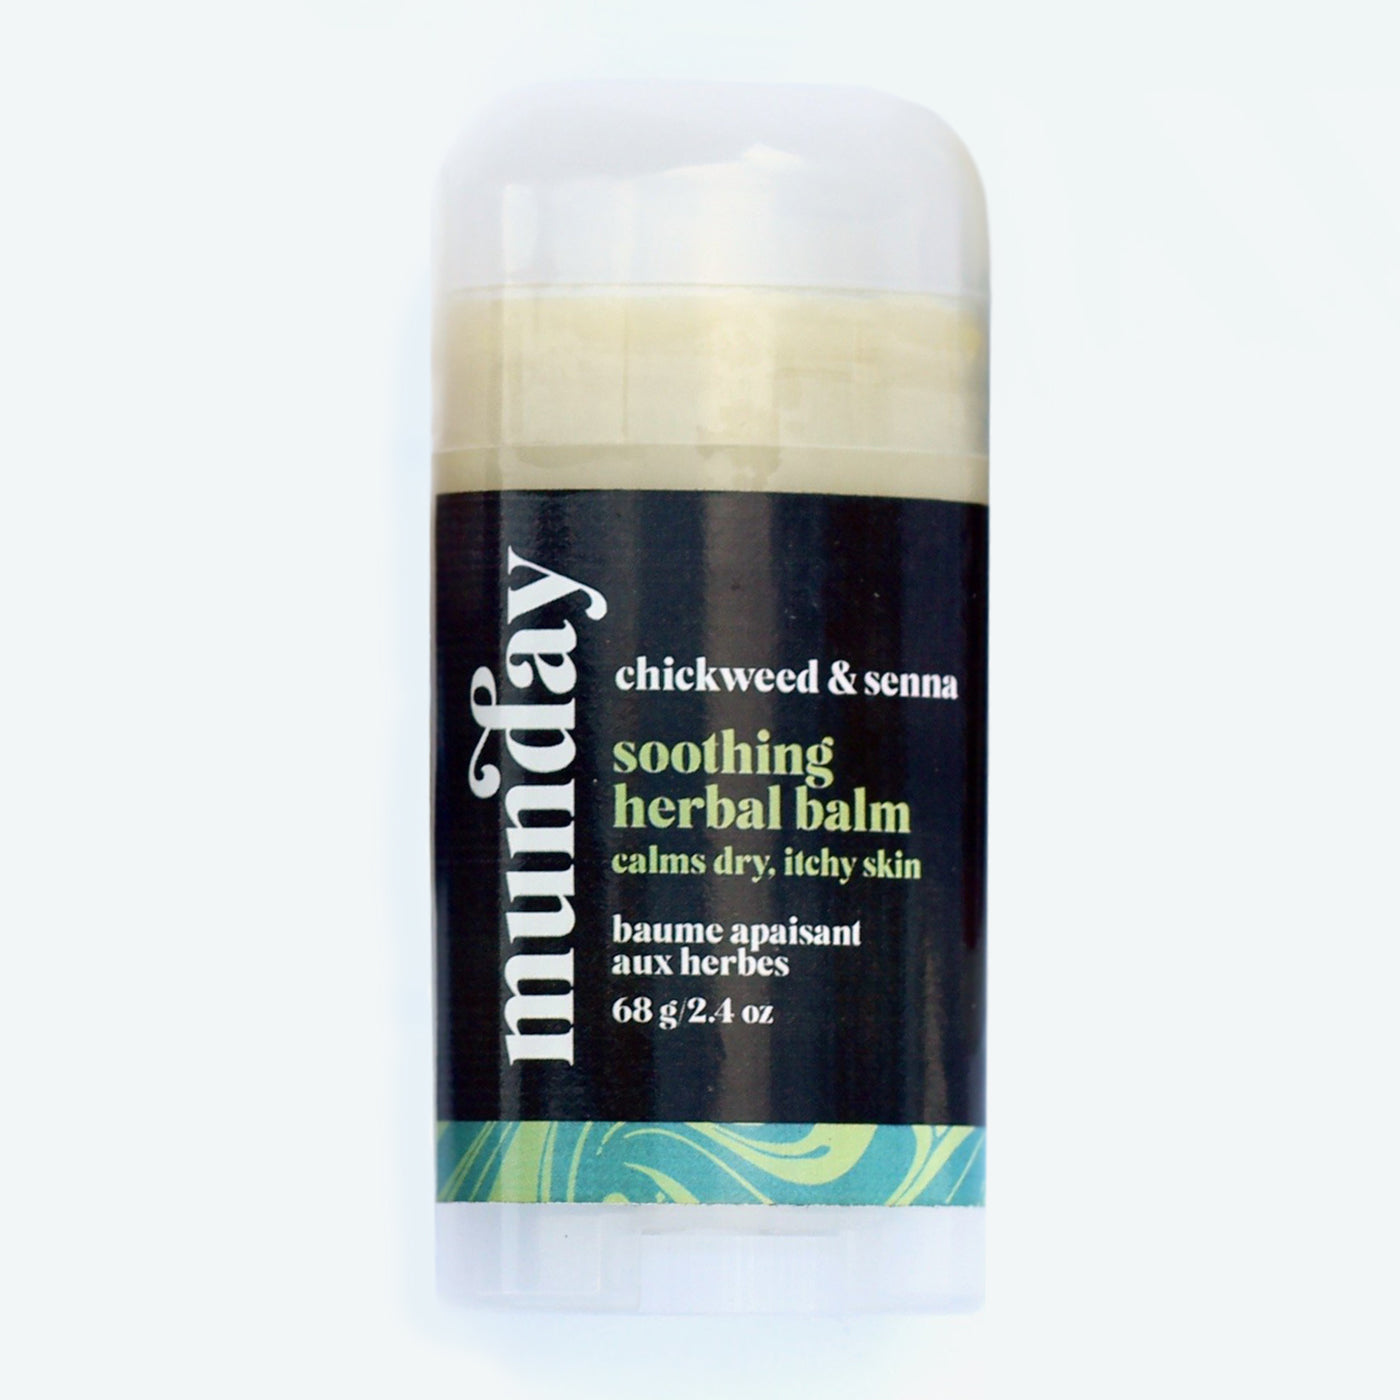 Soothing Herbal Balm with Chickweed & Senna, helps to calm dry and itchy skin. In a twist-up stick for easy application to elbows, knees, shins and other dry areas